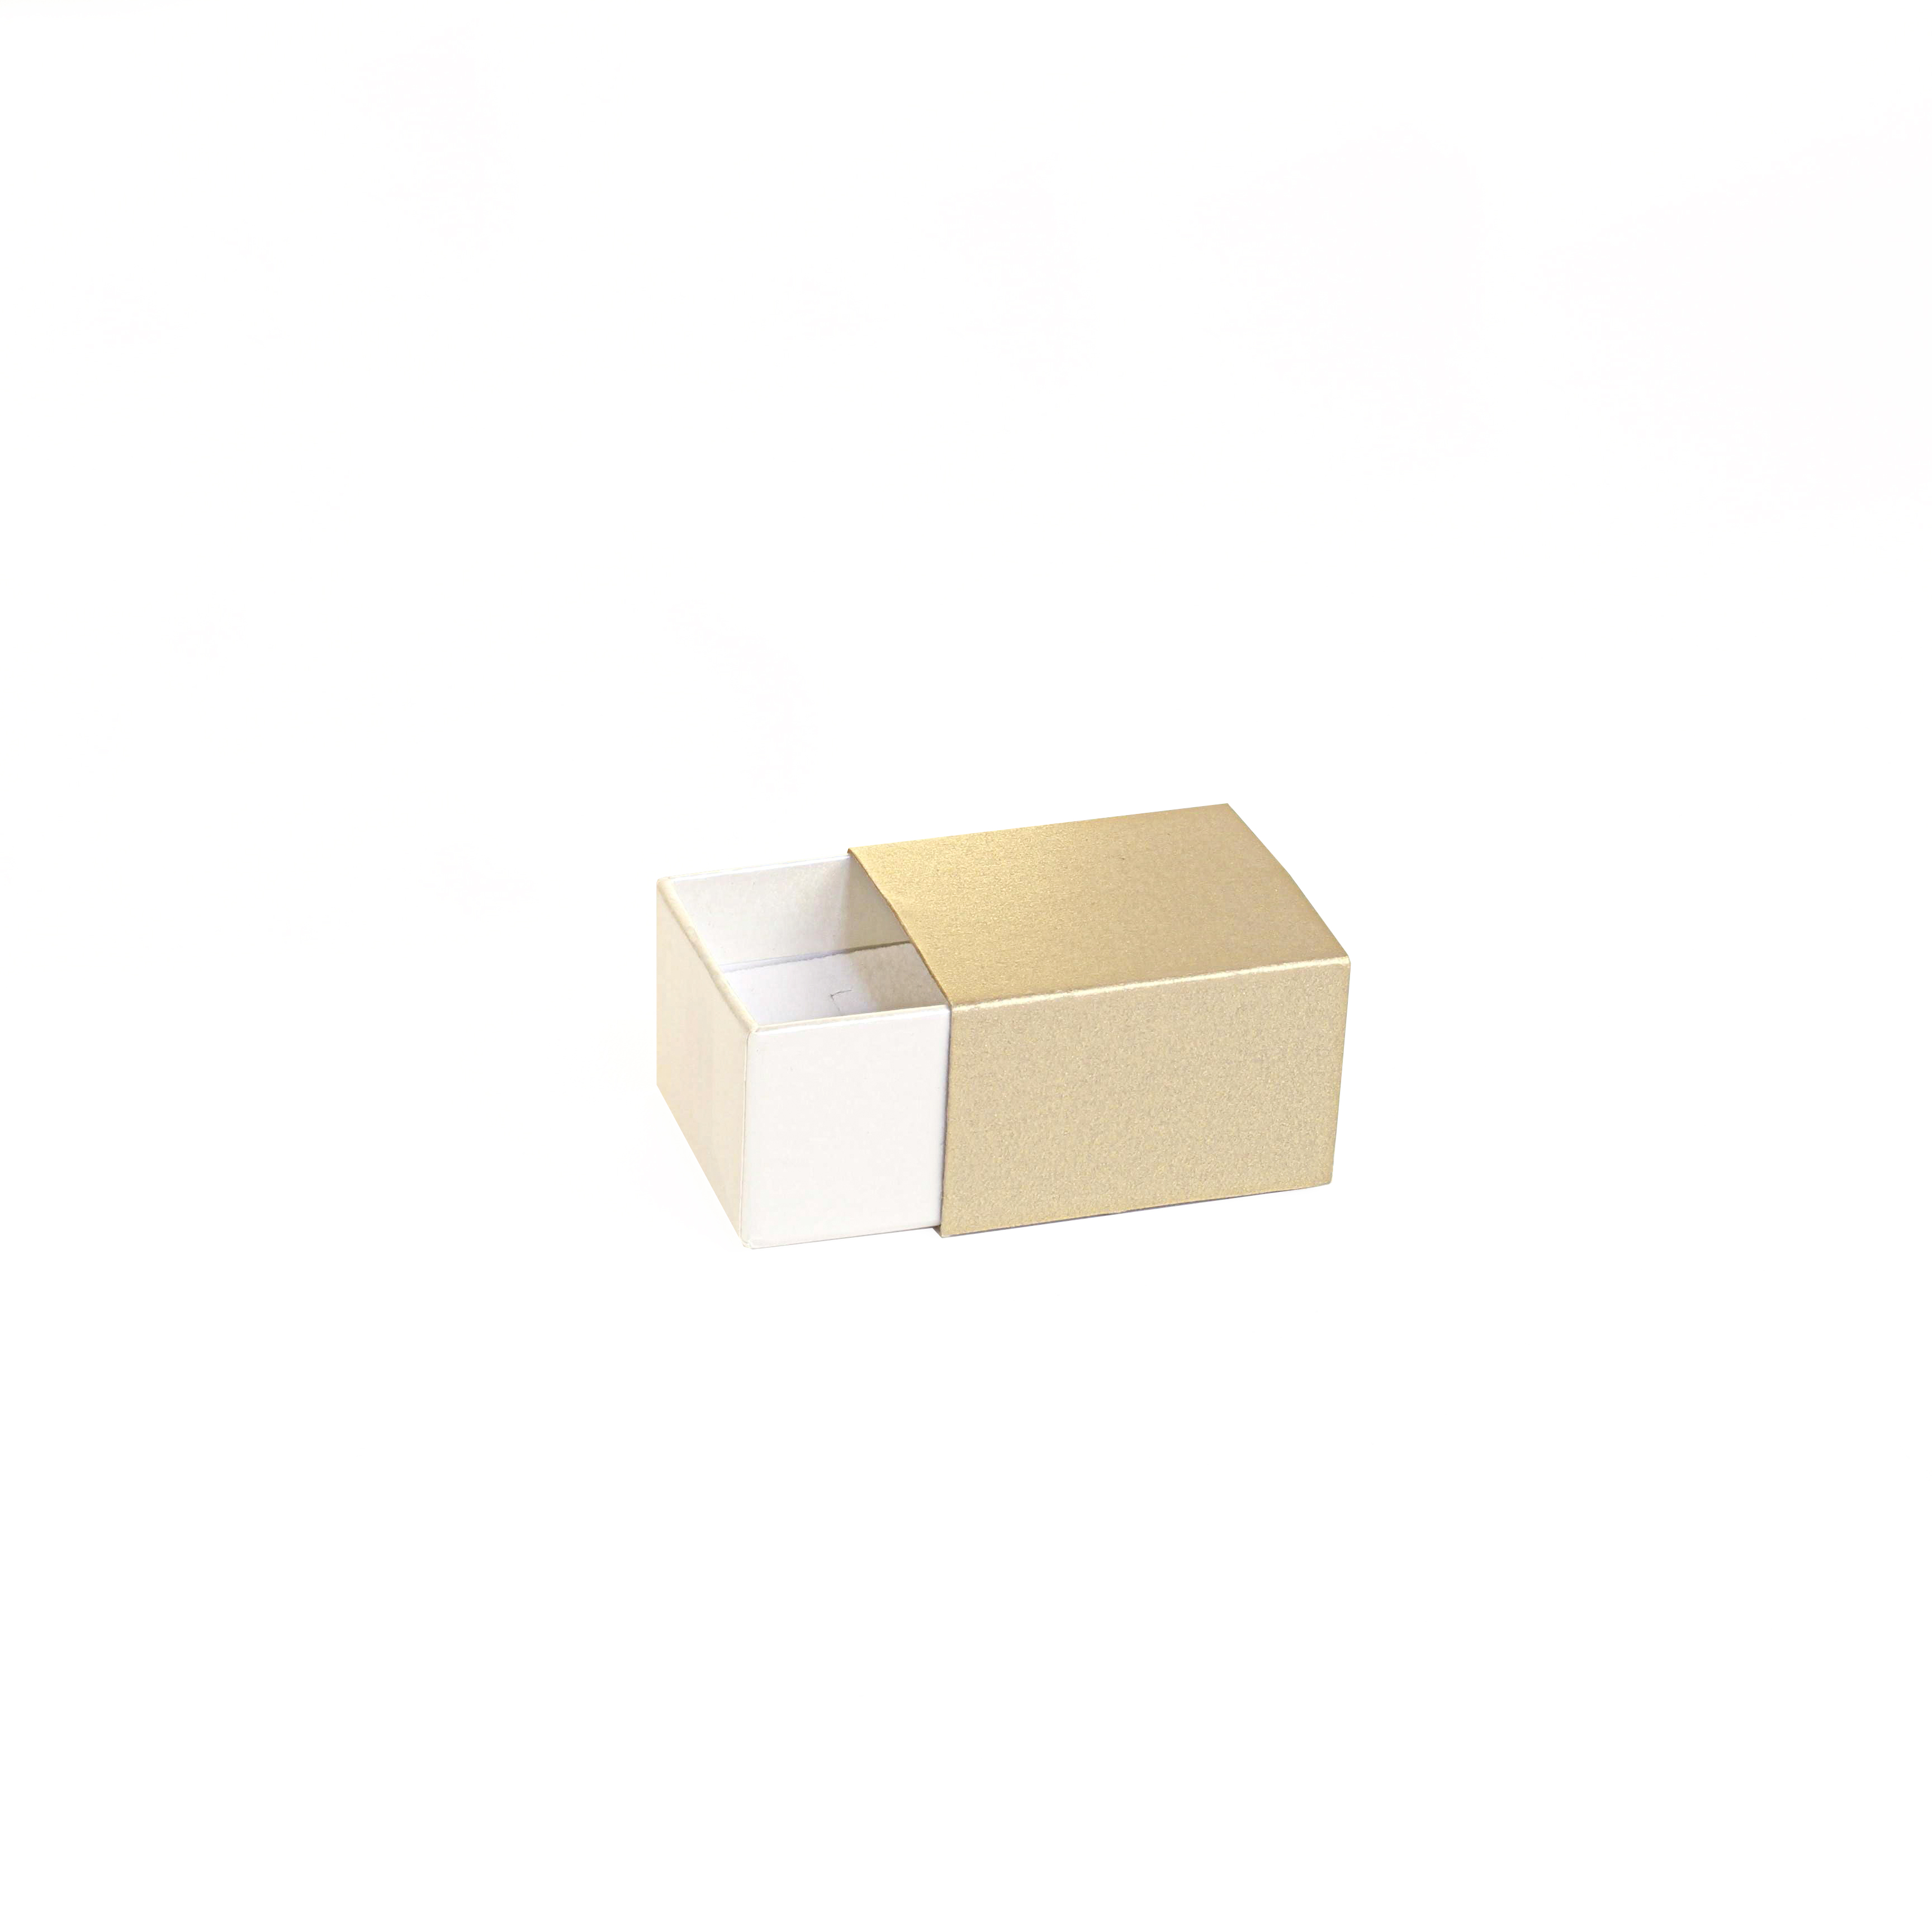 Iridescent gold and cream matchbox style card ring box